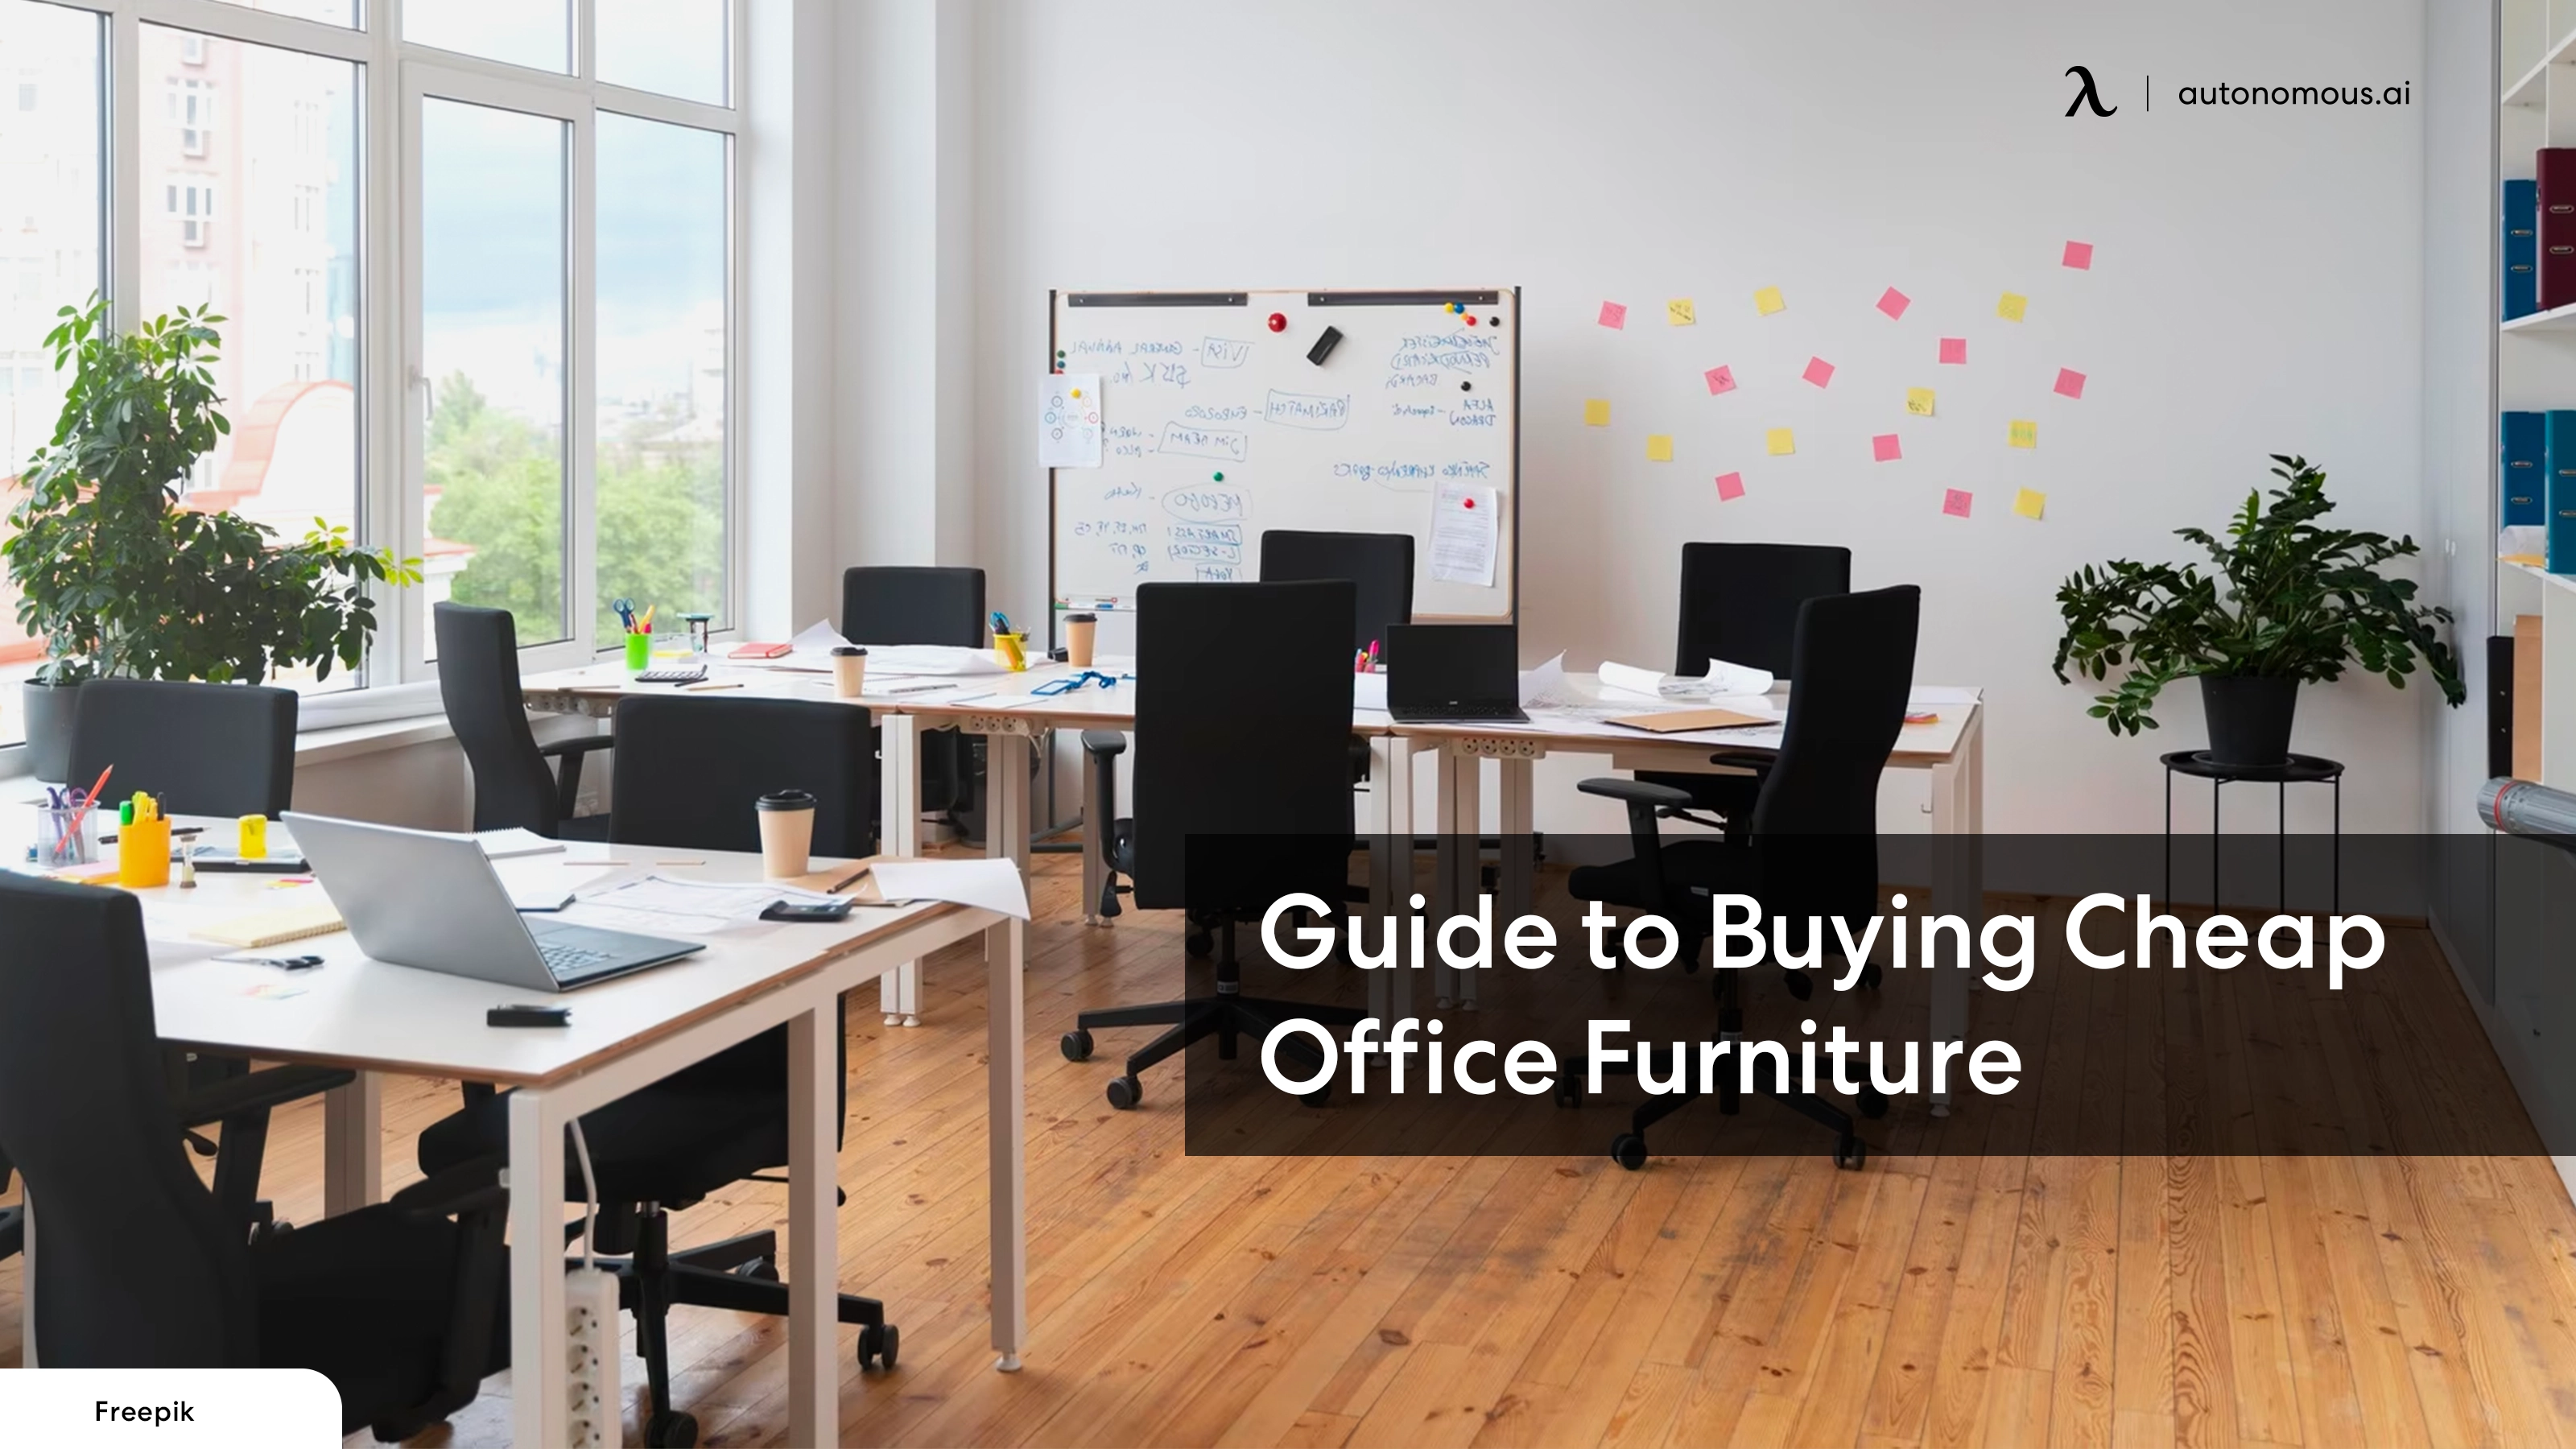 A Guide to Buying Cheap Office Furniture for Every Budget